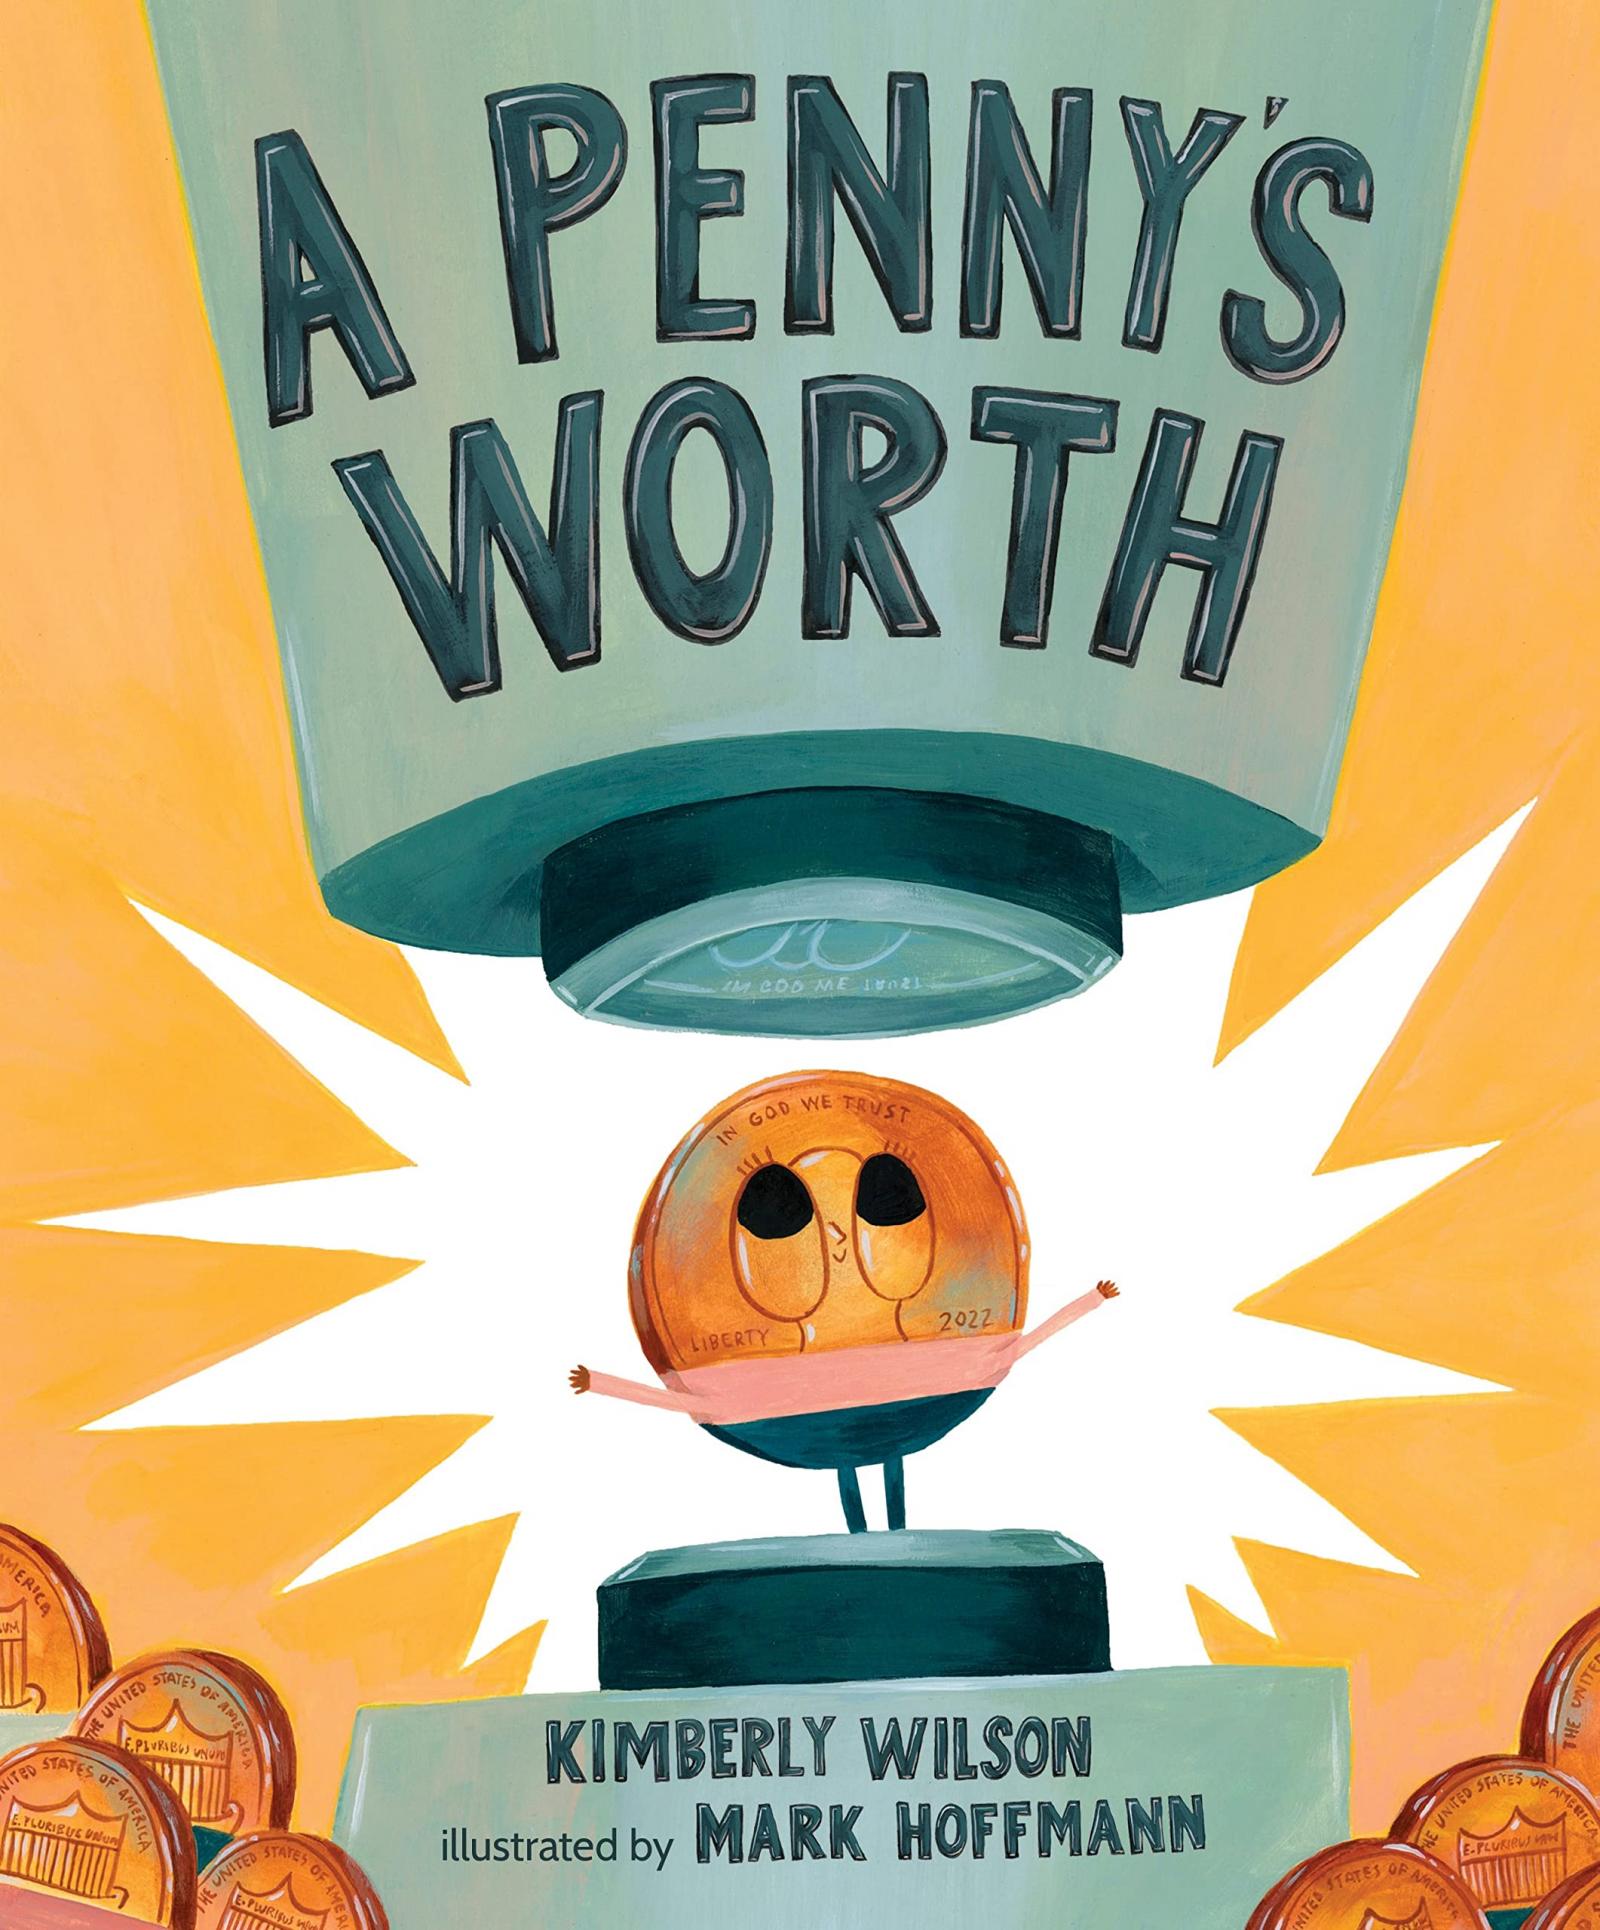 A Penny's Worth by Kimberly Wilson